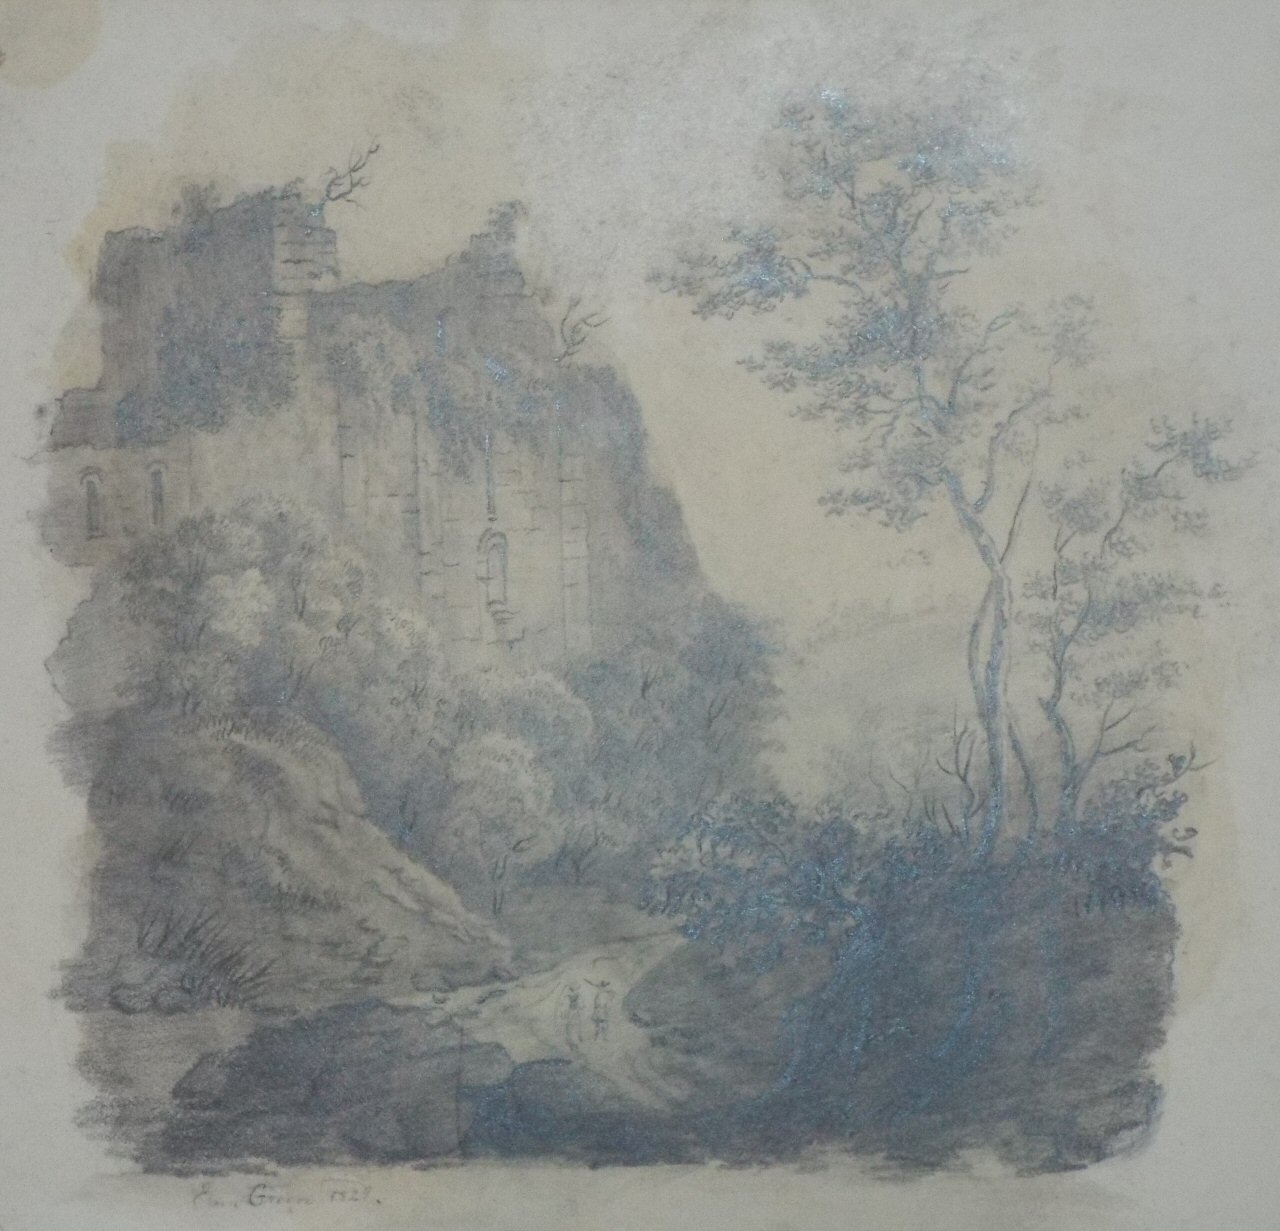 Pencil sketch - Landscape with ruined castle wall